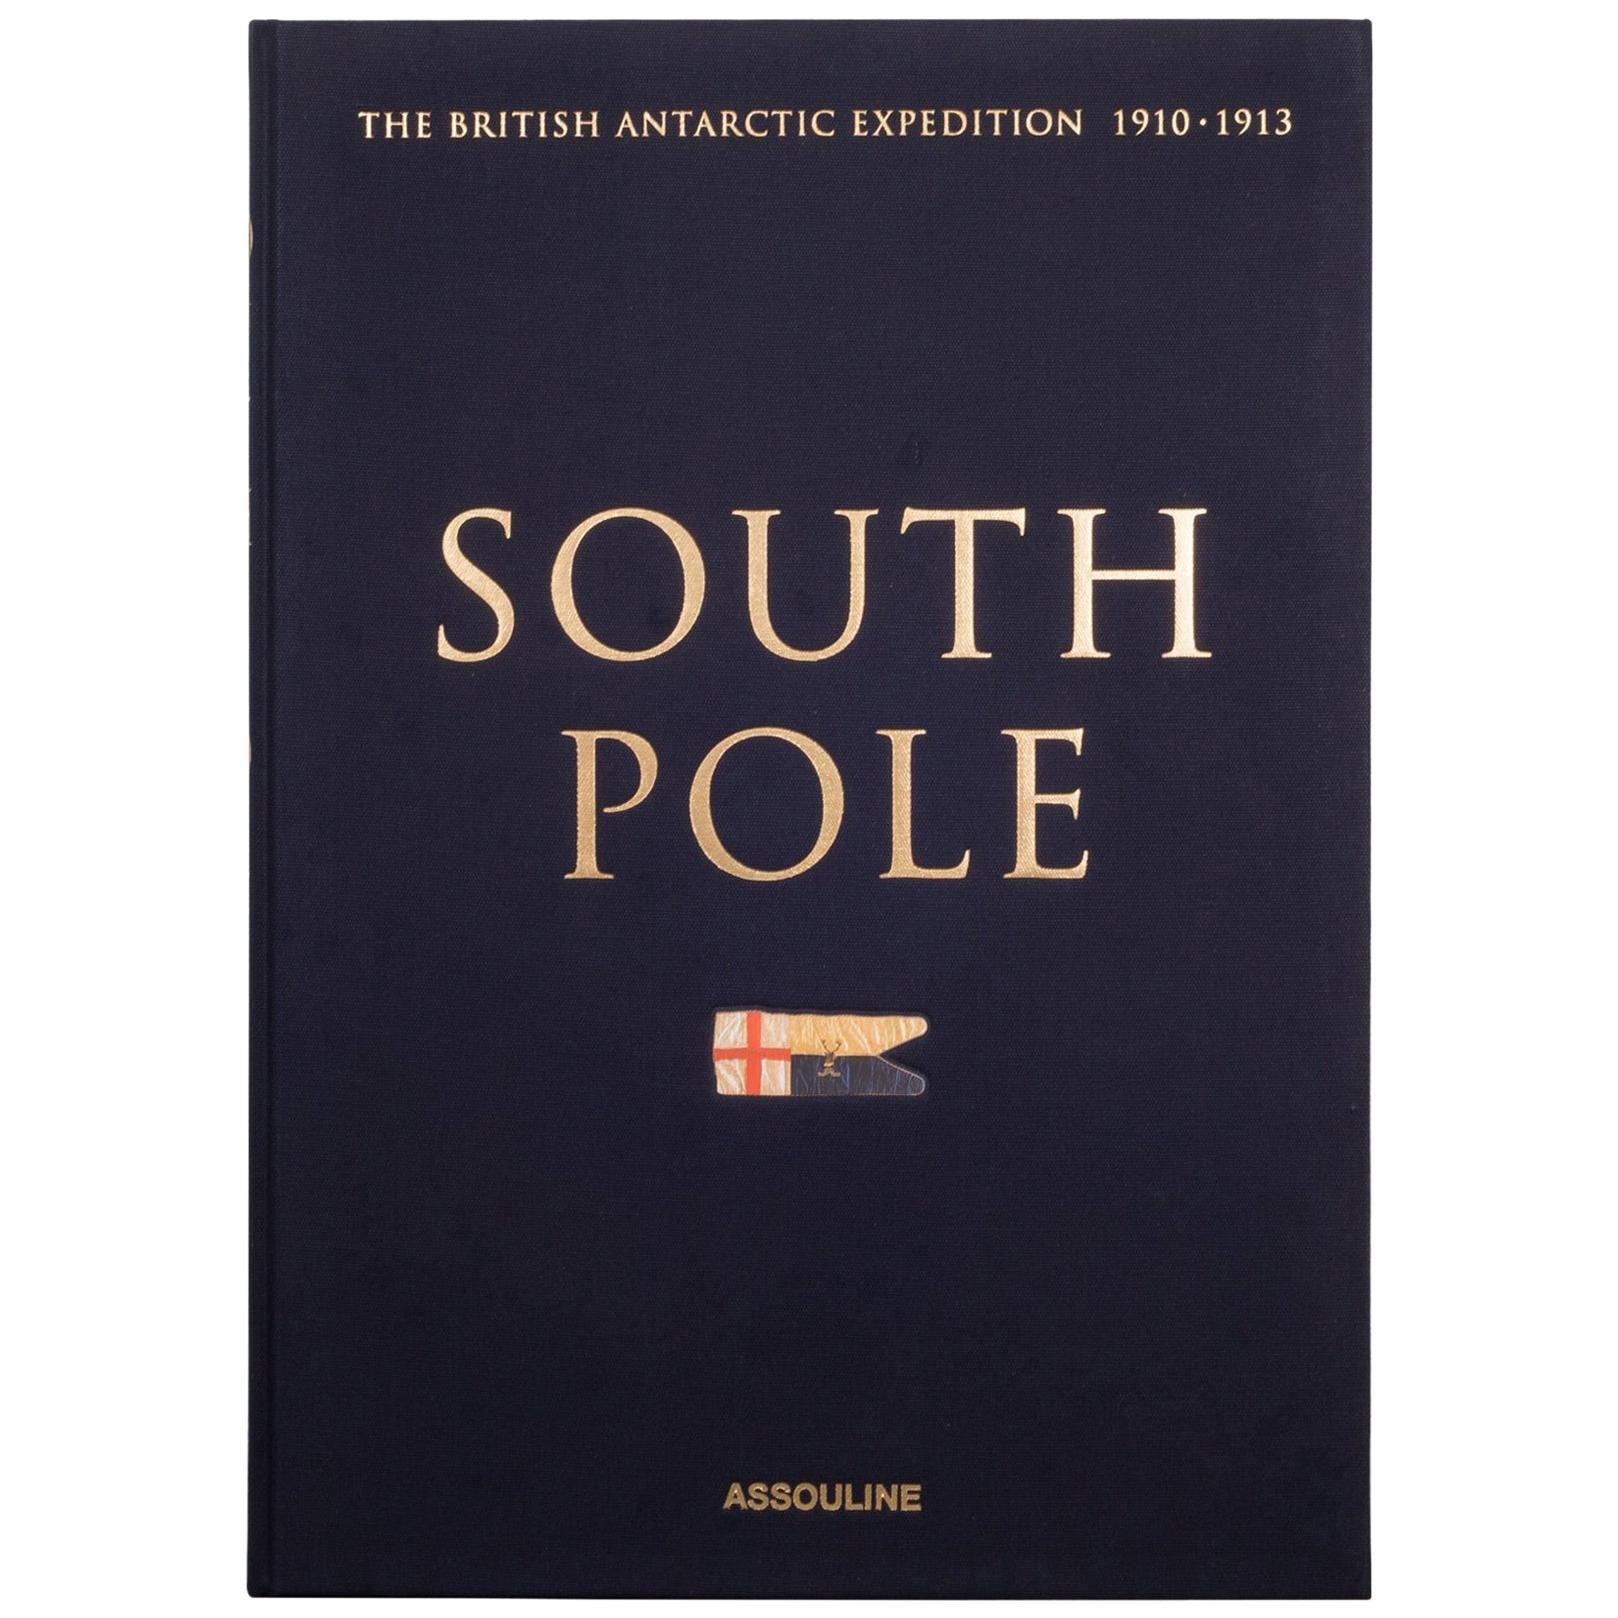 Oversized Limited Edition "South Pole" The British Antarctic Expedition, 1910